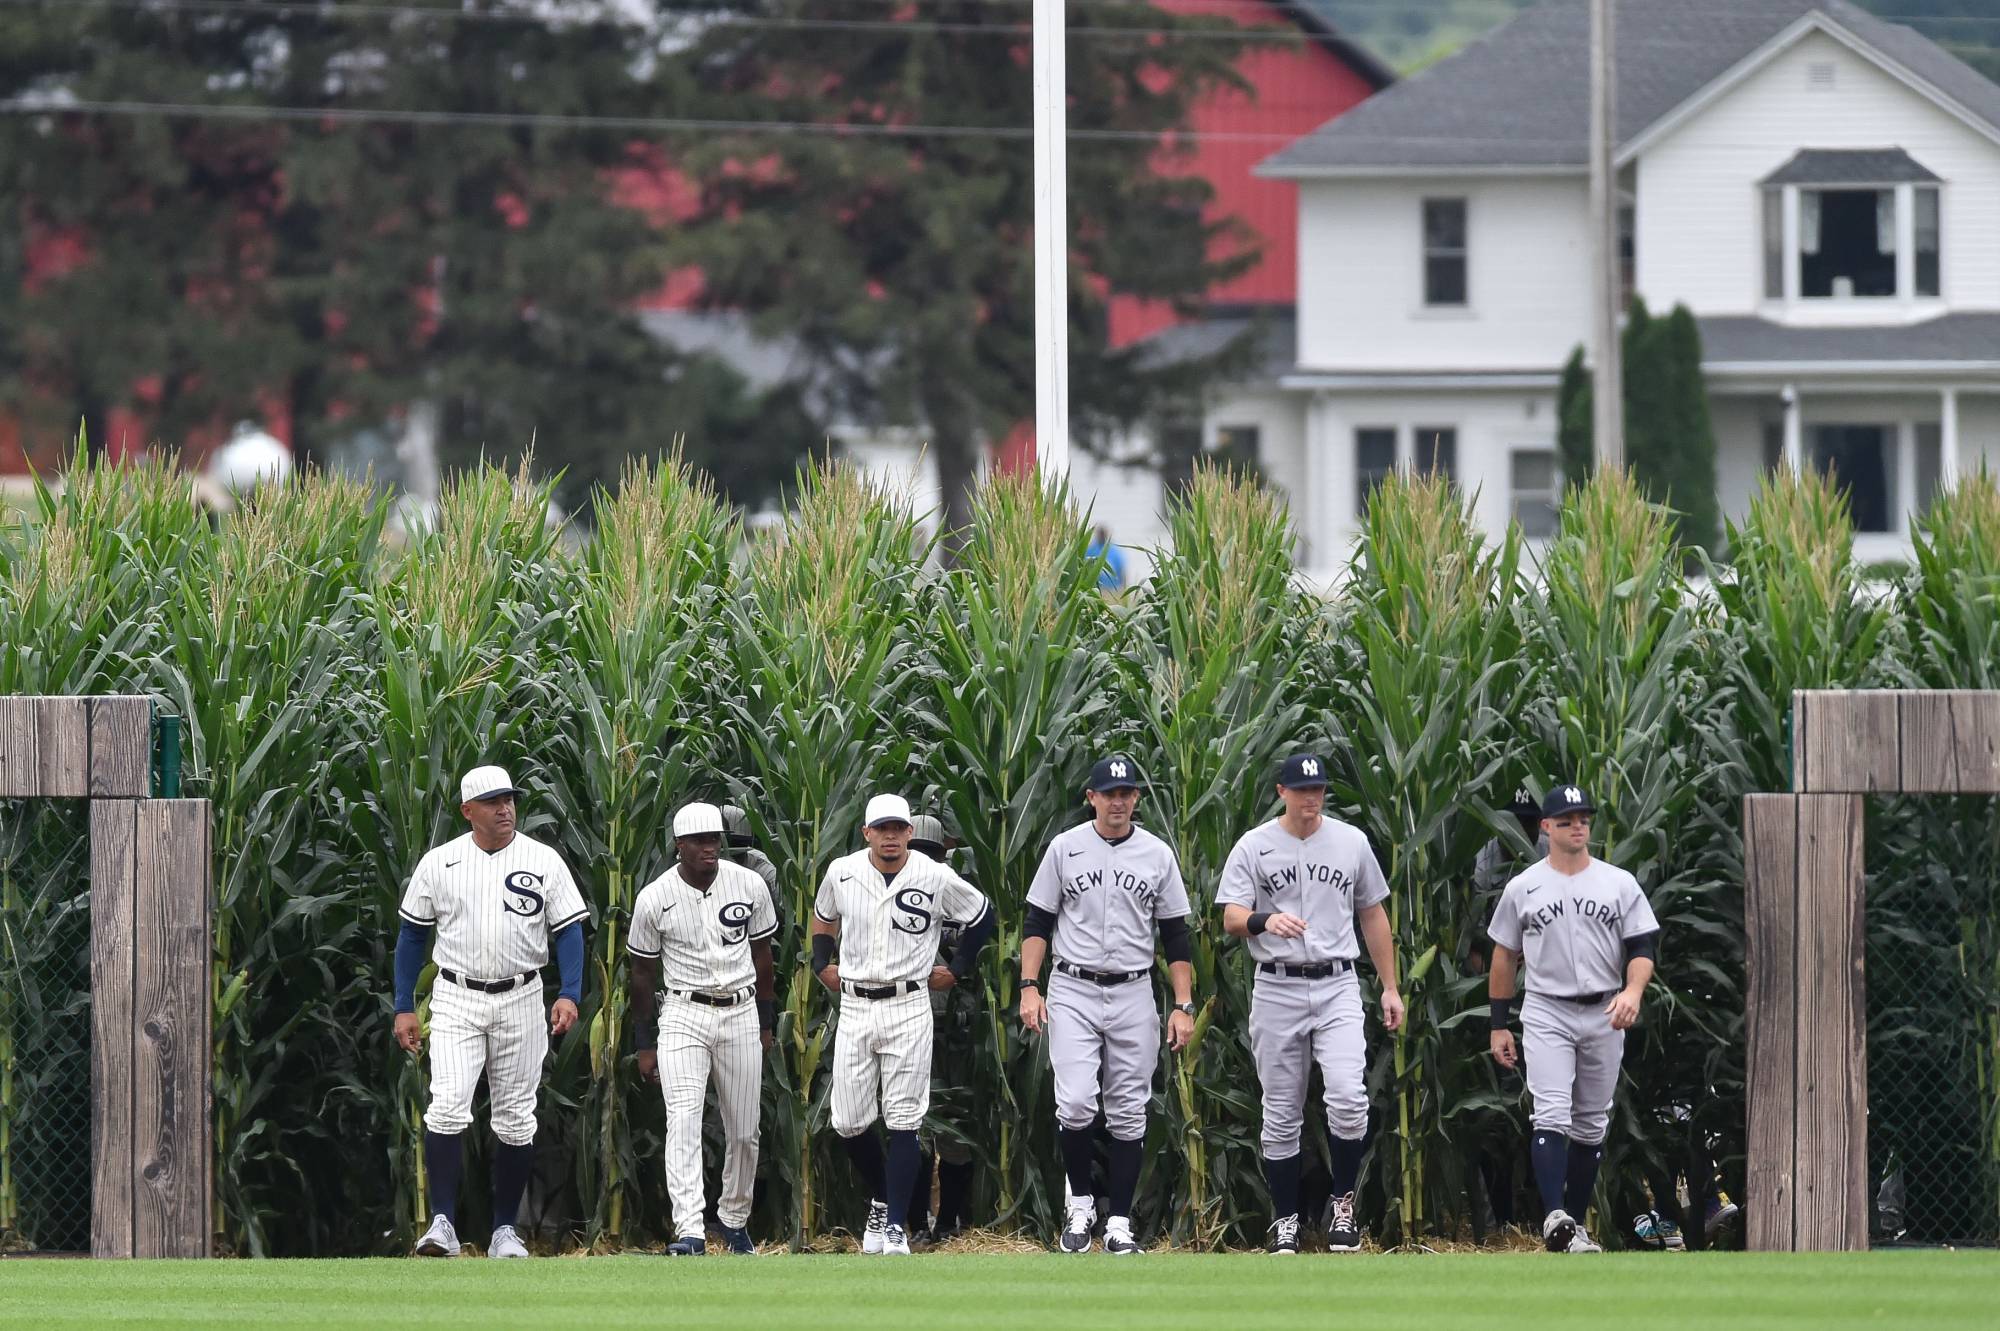 MLB will return to 'Field of Dreams' in 2022 - The Japan Times